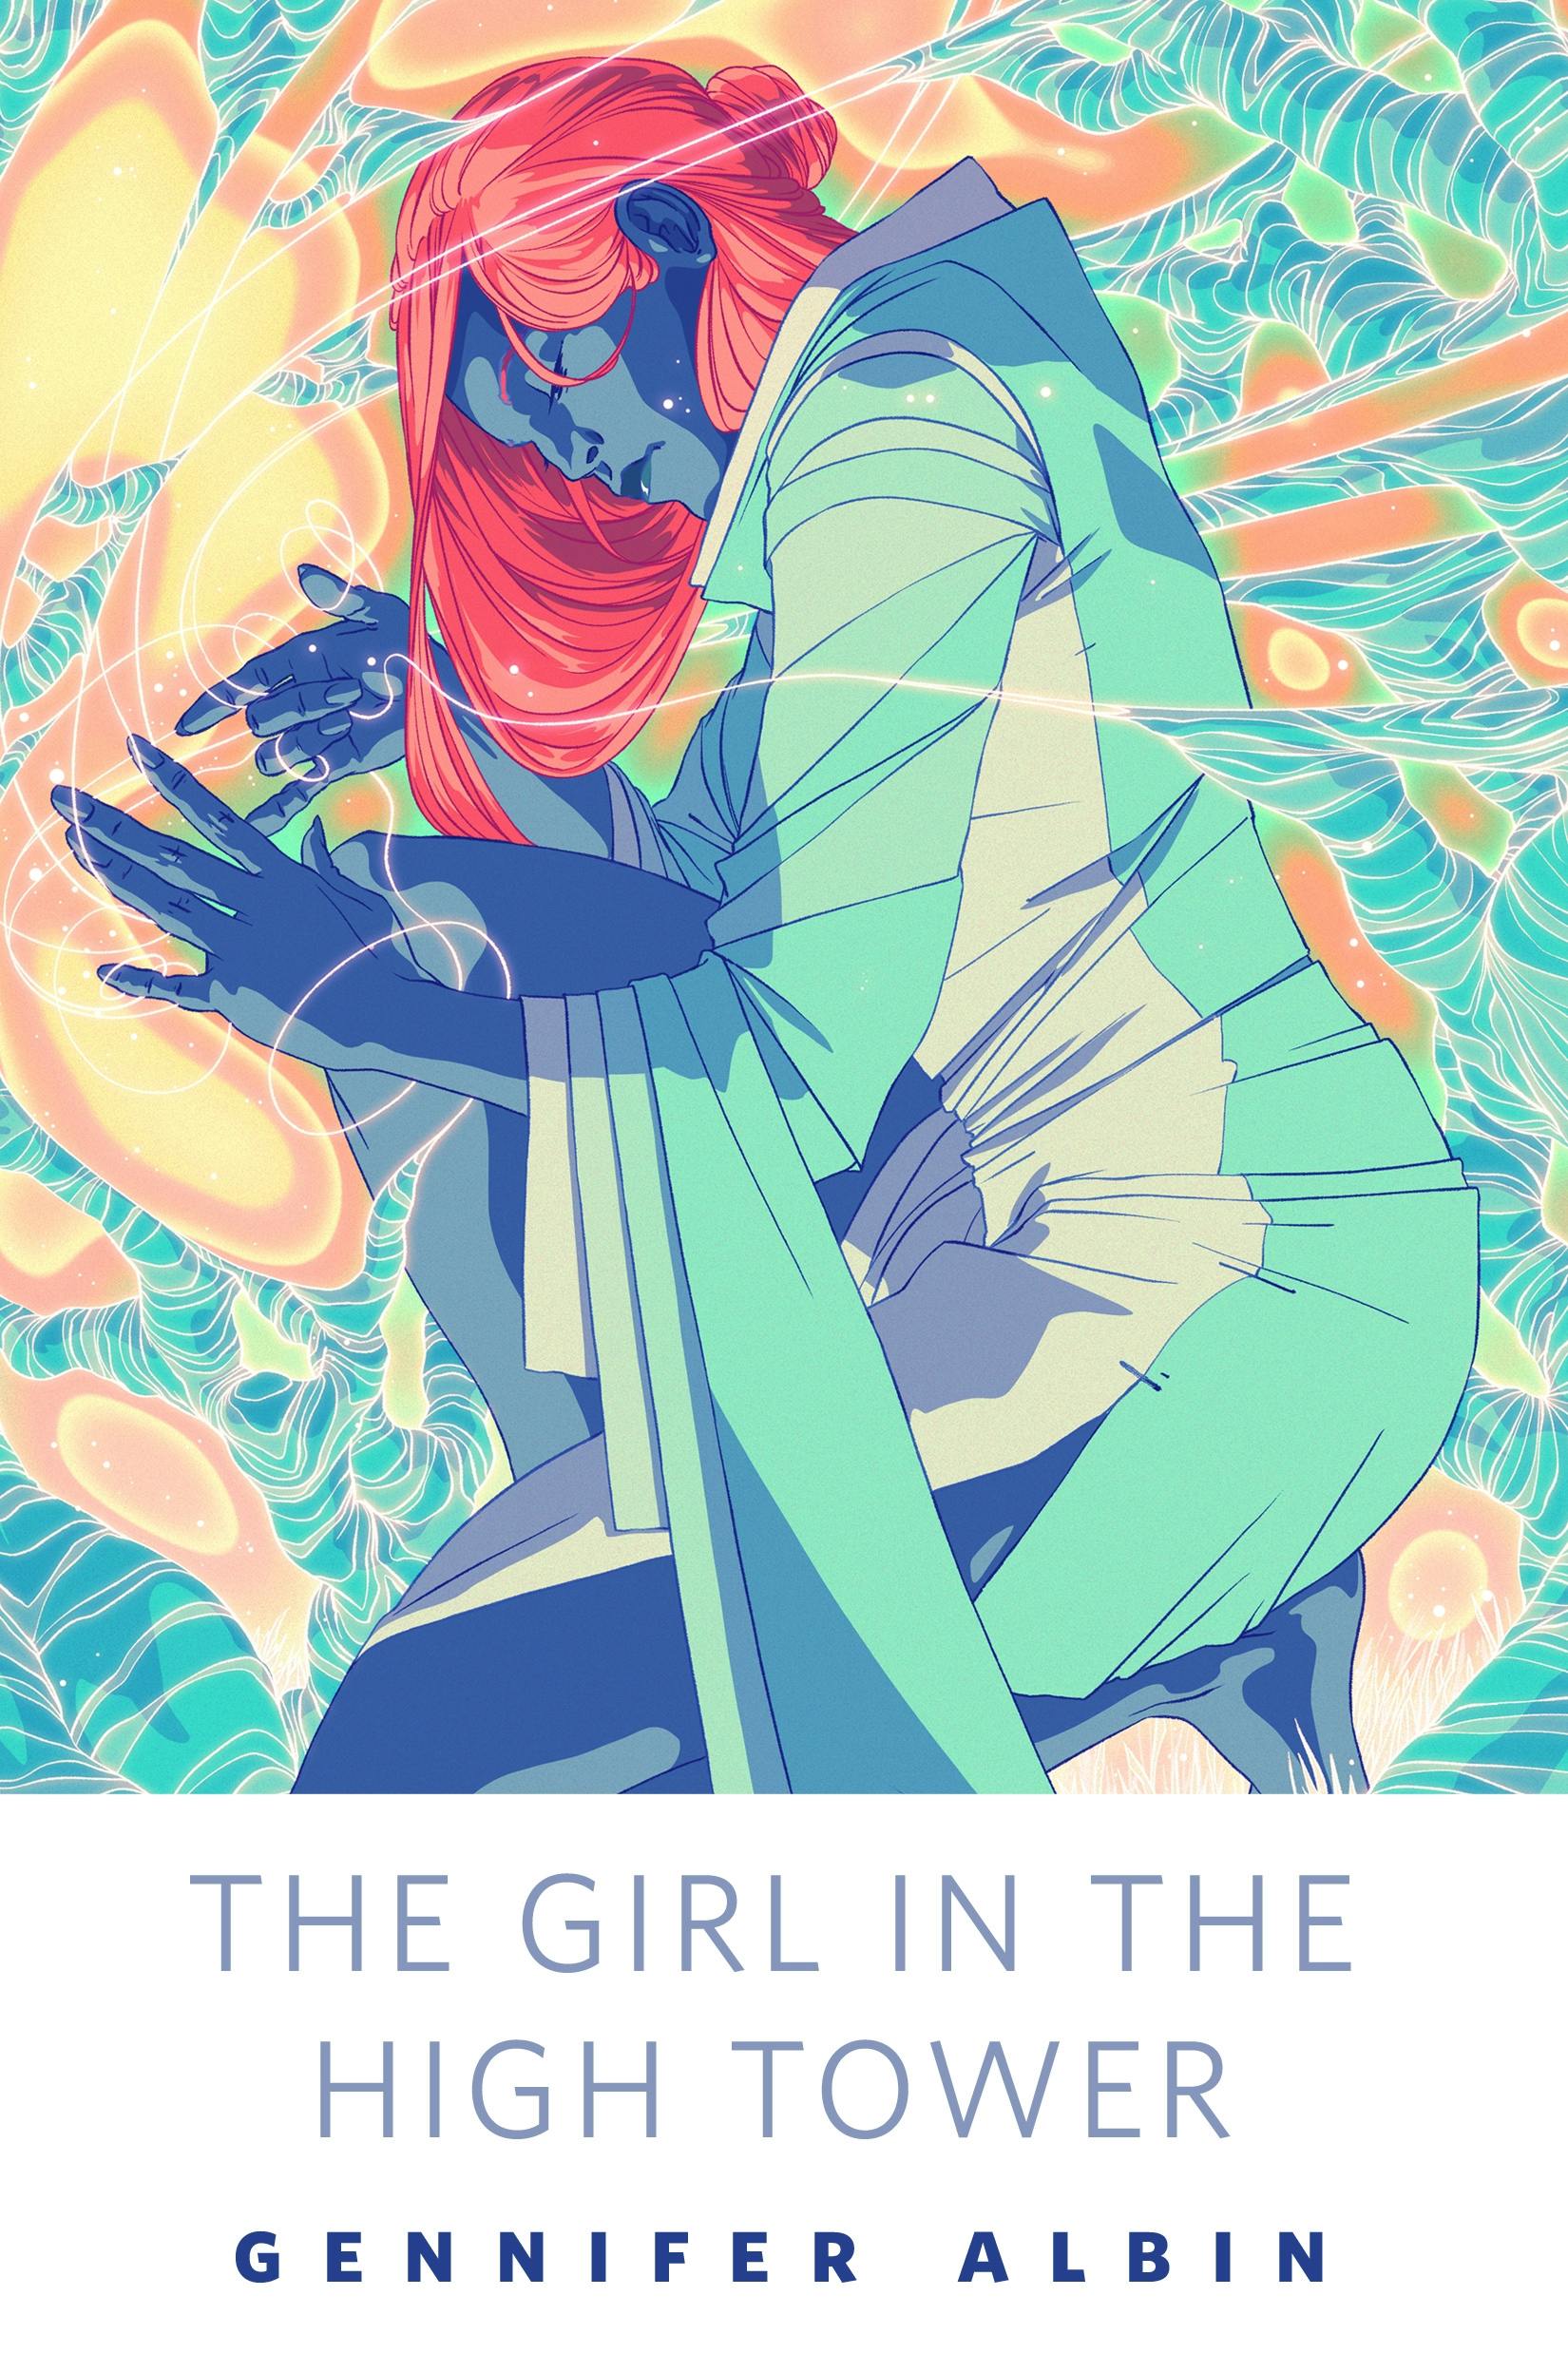 Cover for the book titled as: The Girl in the High Tower